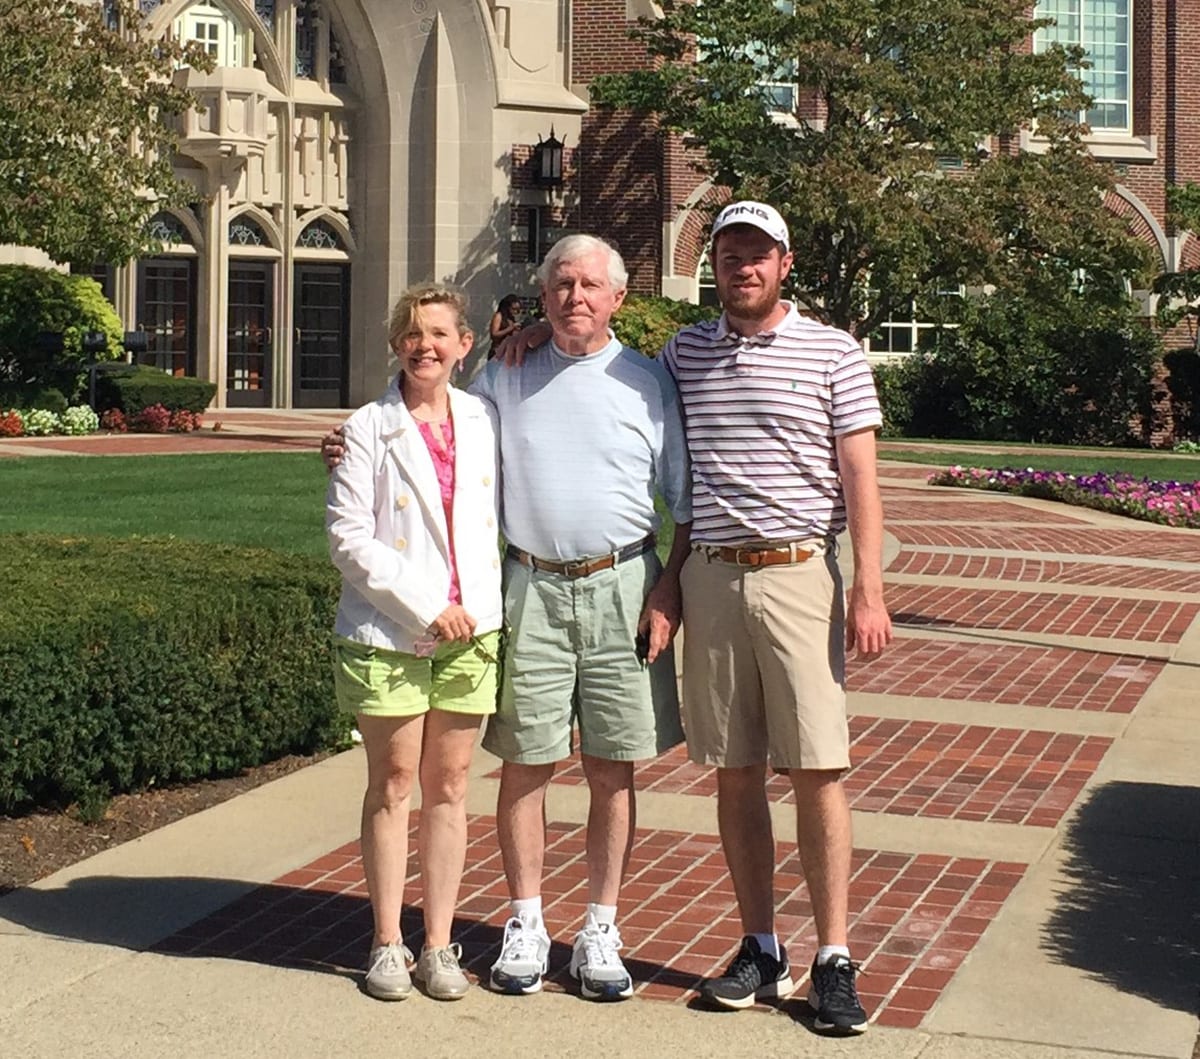 Patrick J. Healey ’17 with his mother, Kathleen McCormick Healey ’84, and grandfather, Edward J. McCormick ’57 in front of Harkins Hall.